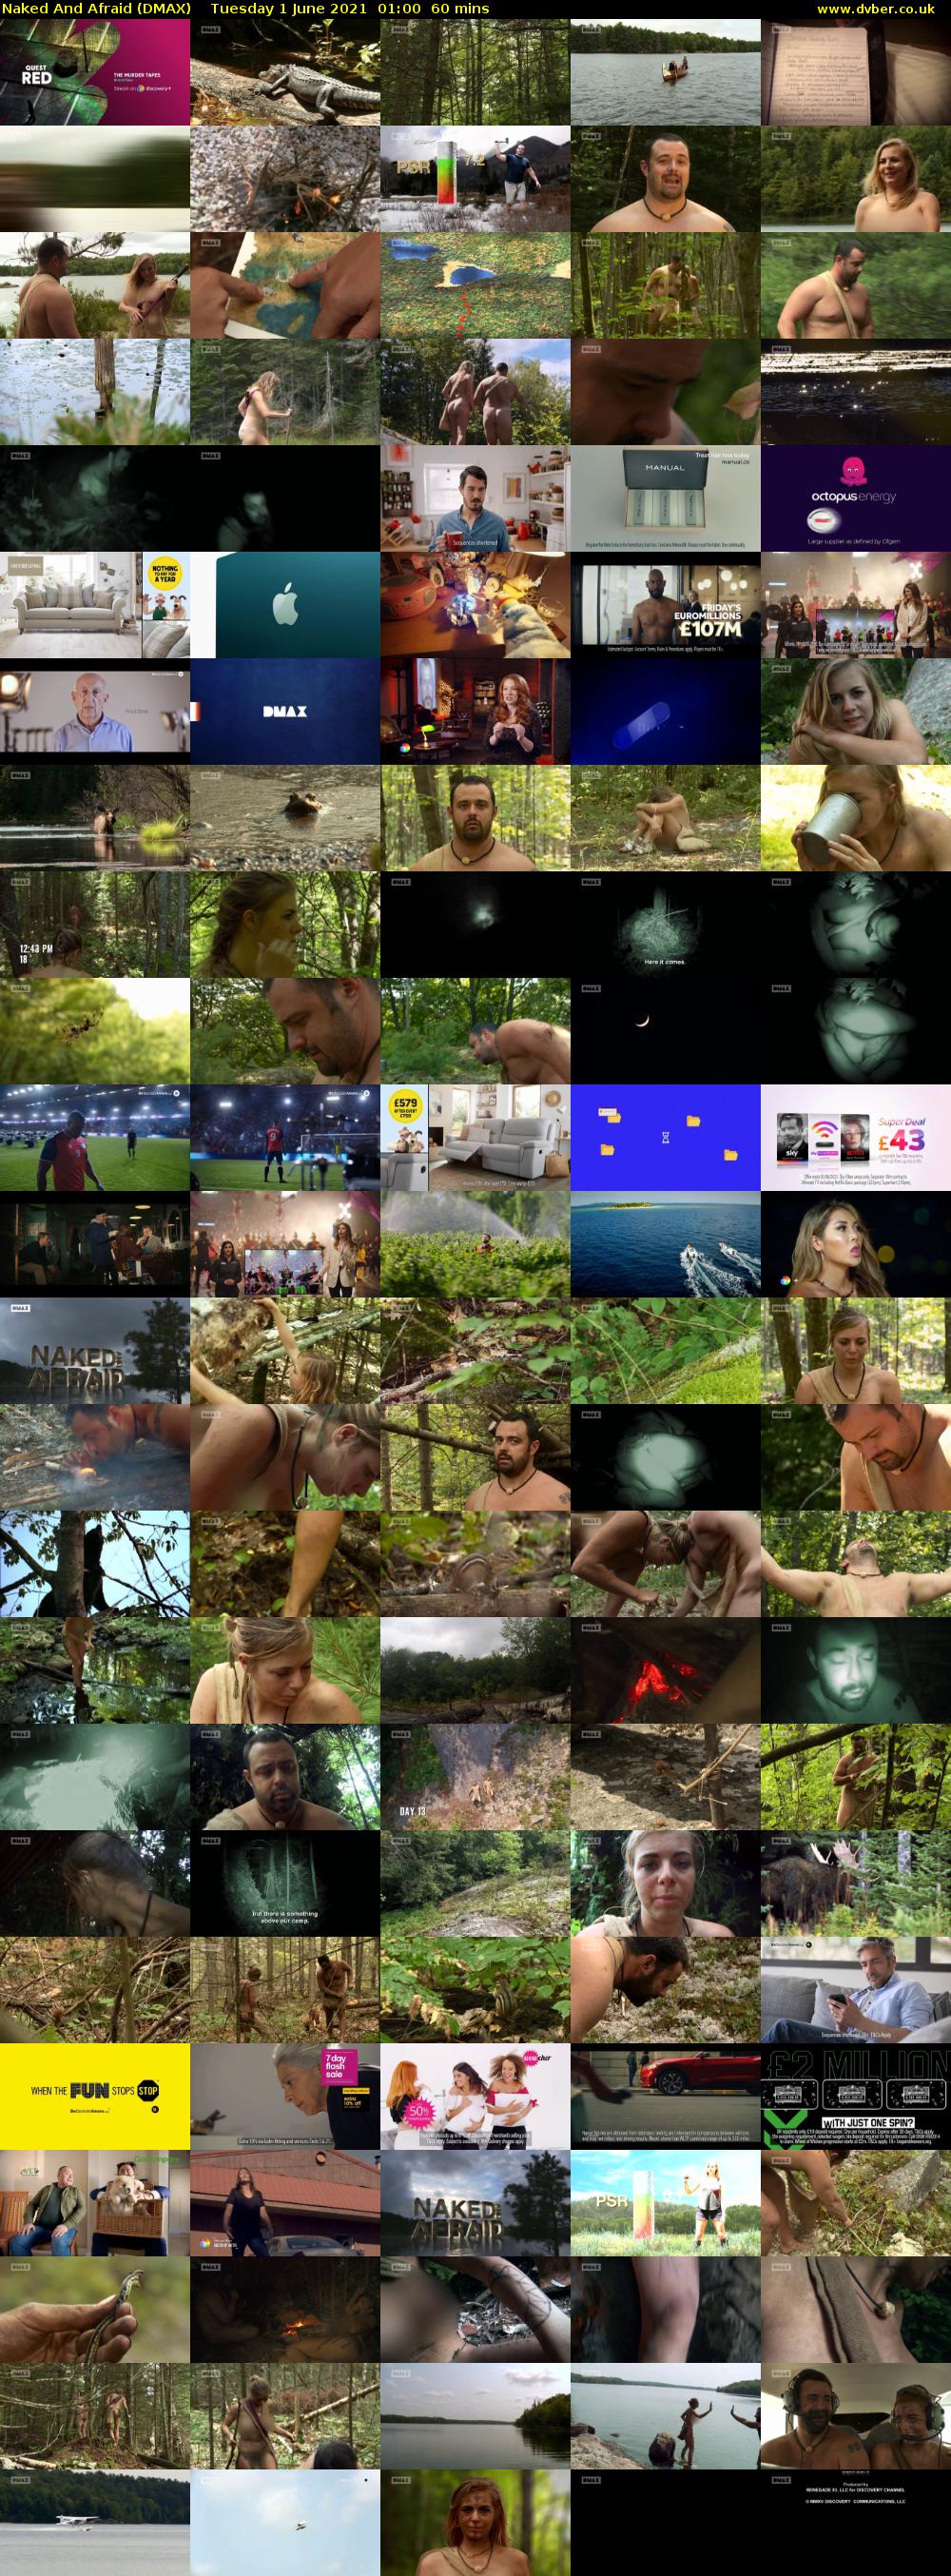 Naked And Afraid (DMAX) Tuesday 1 June 2021 01:00 - 02:00